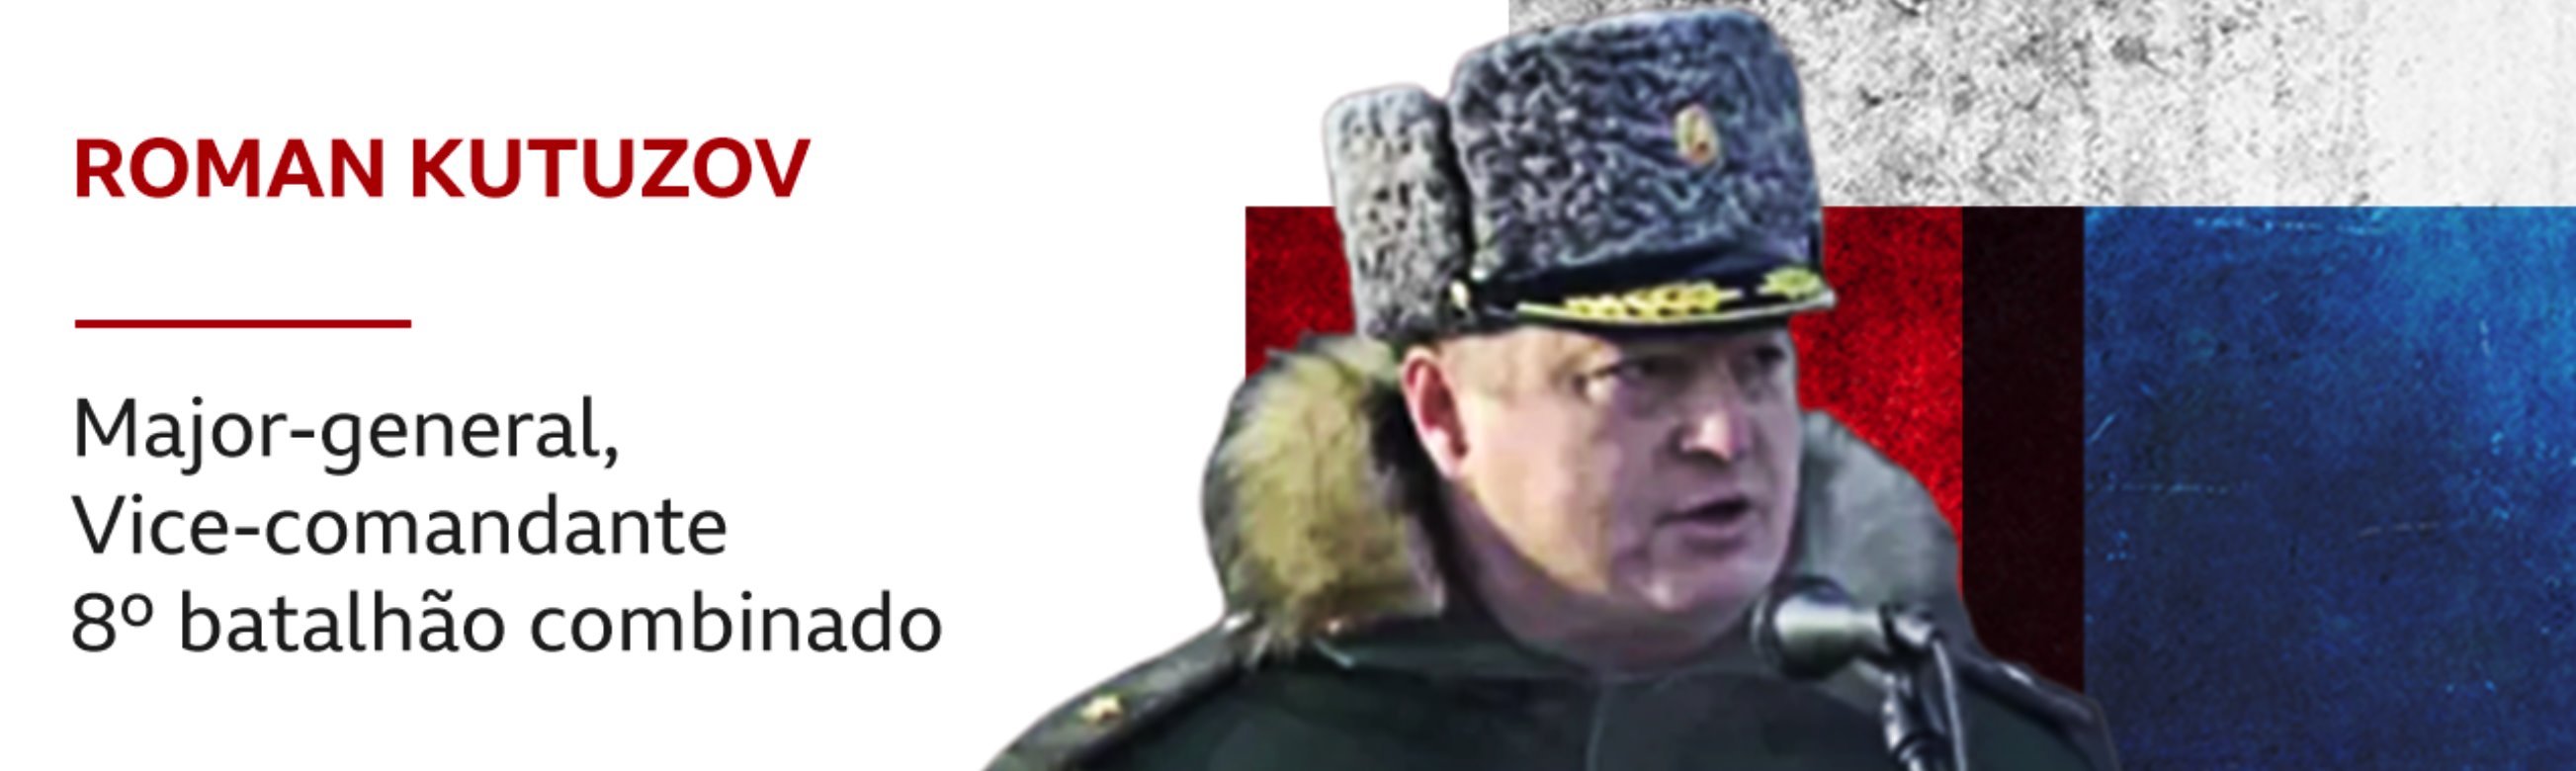 Russian military